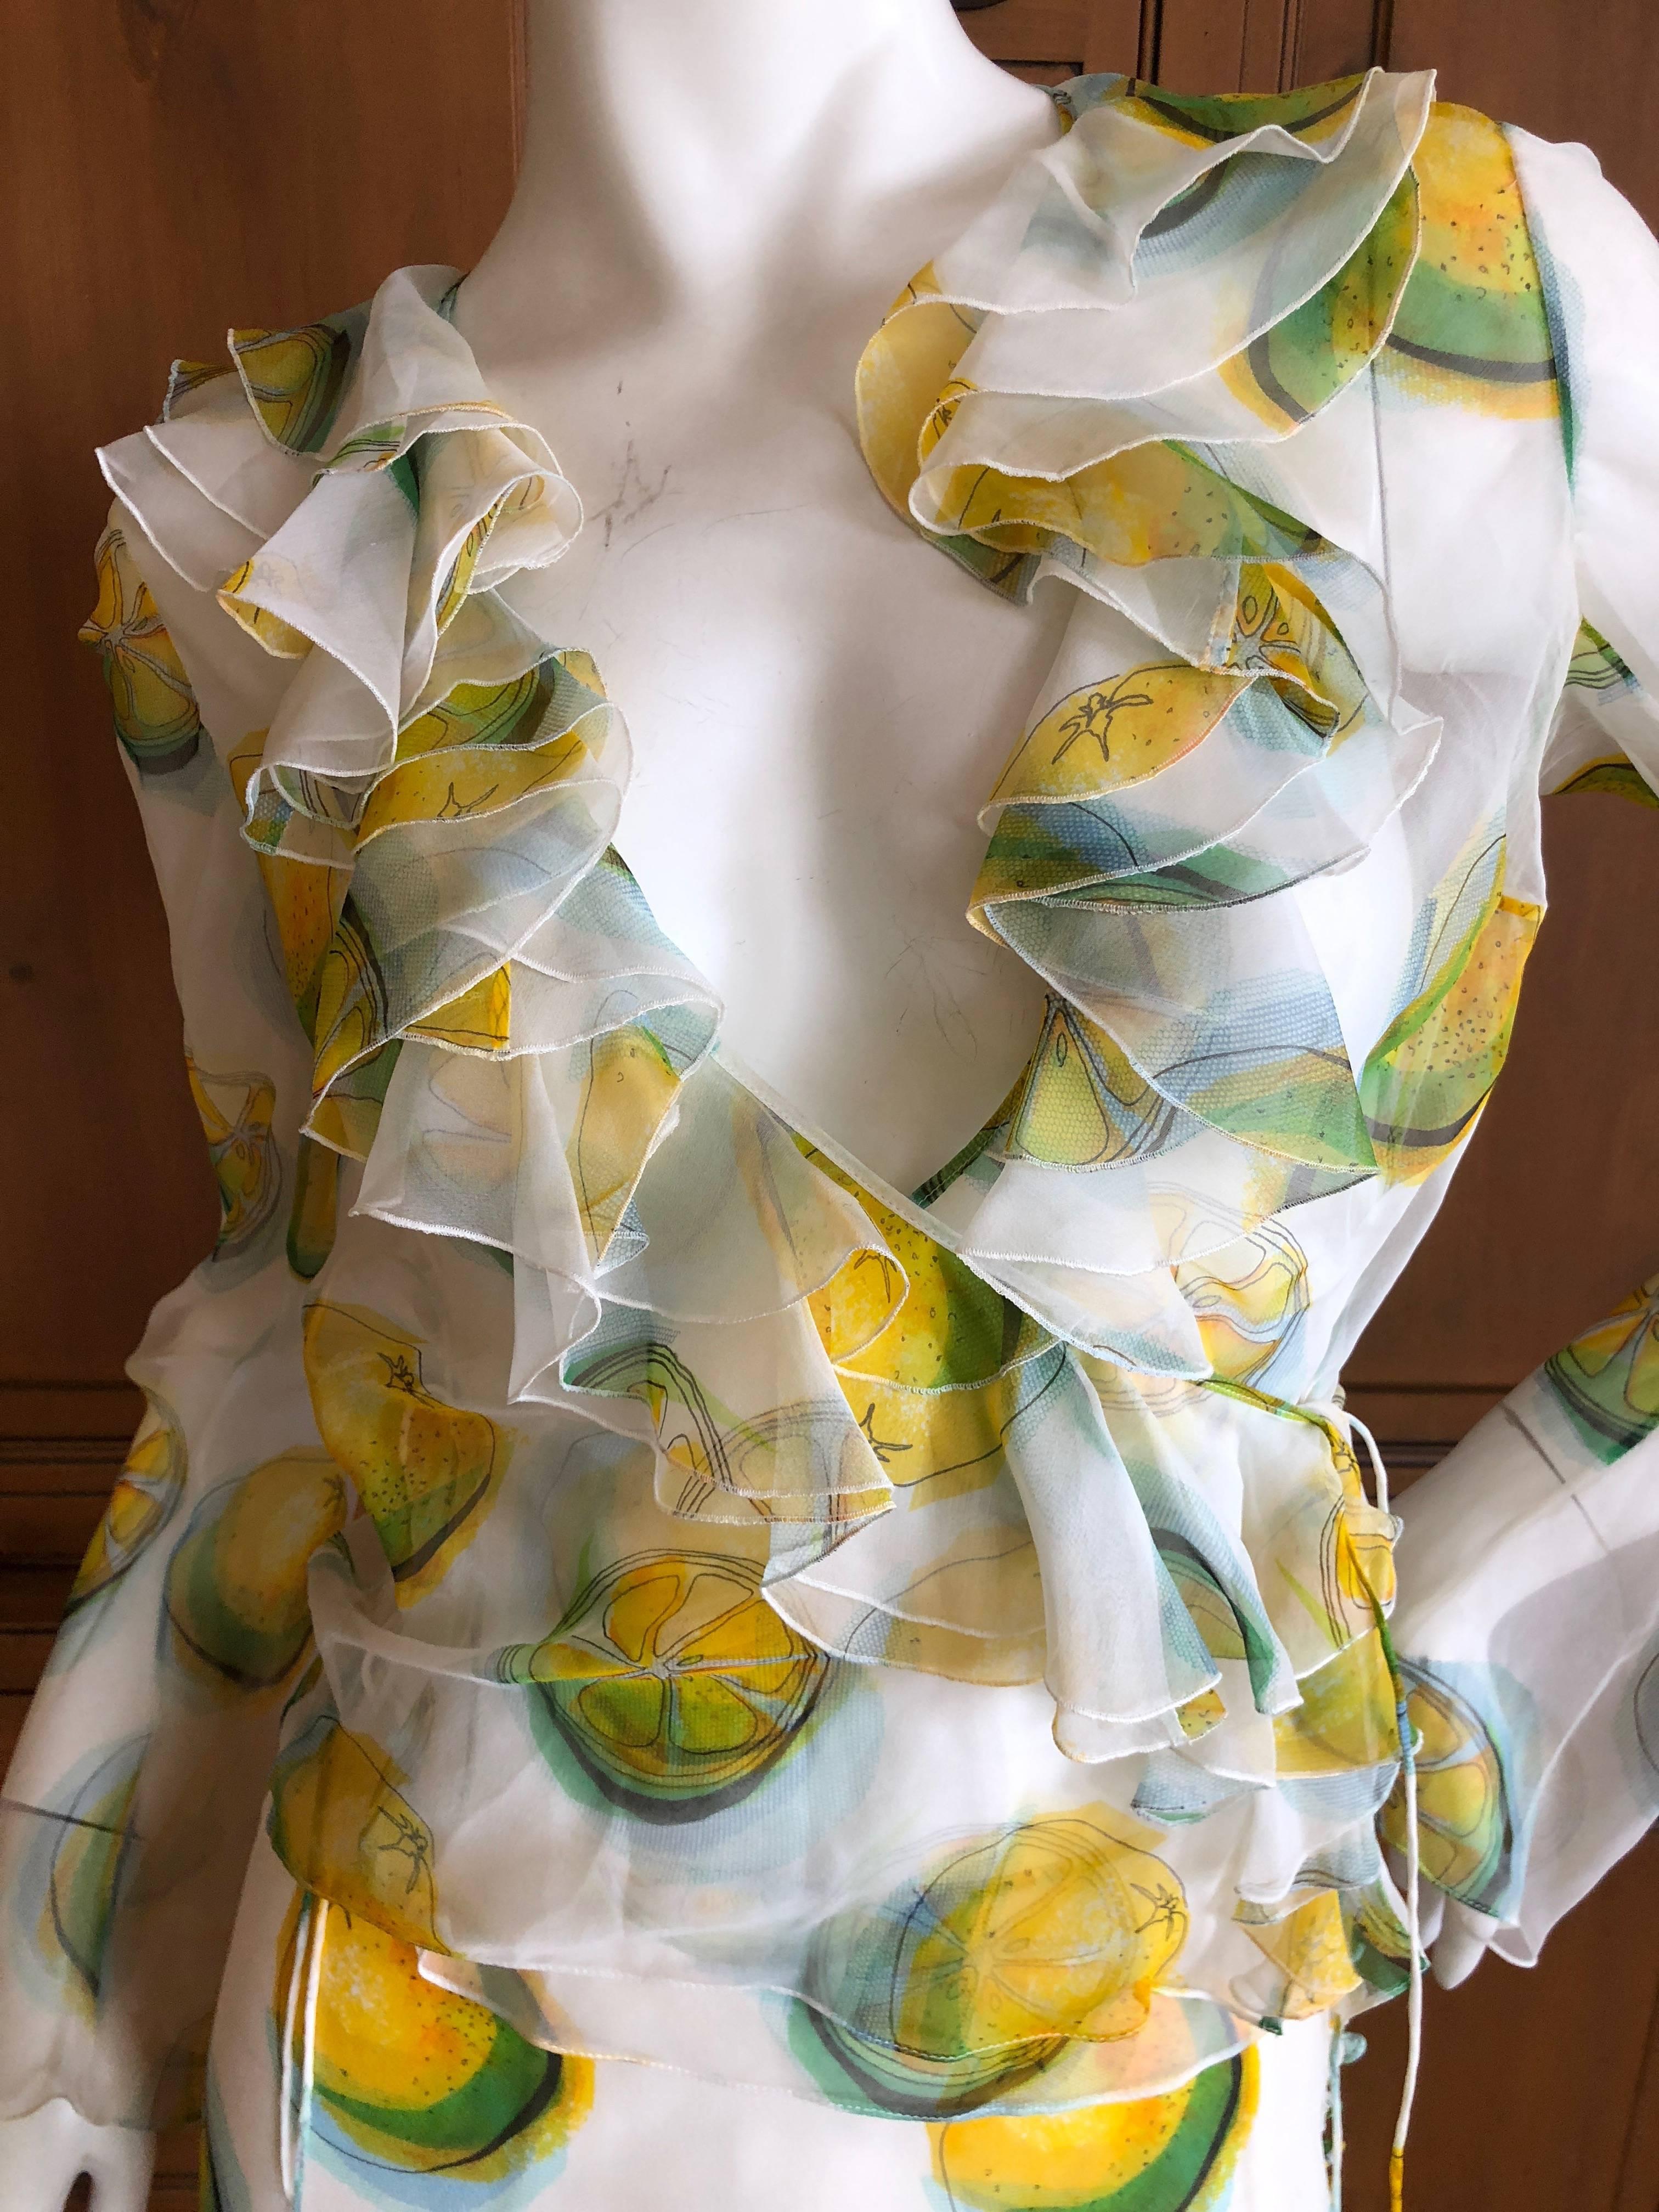 Christian Dior by Galliano 2004 Sheer Silk 2 Piece Ruffled Low Cut Lemon Dress  In Excellent Condition For Sale In Cloverdale, CA